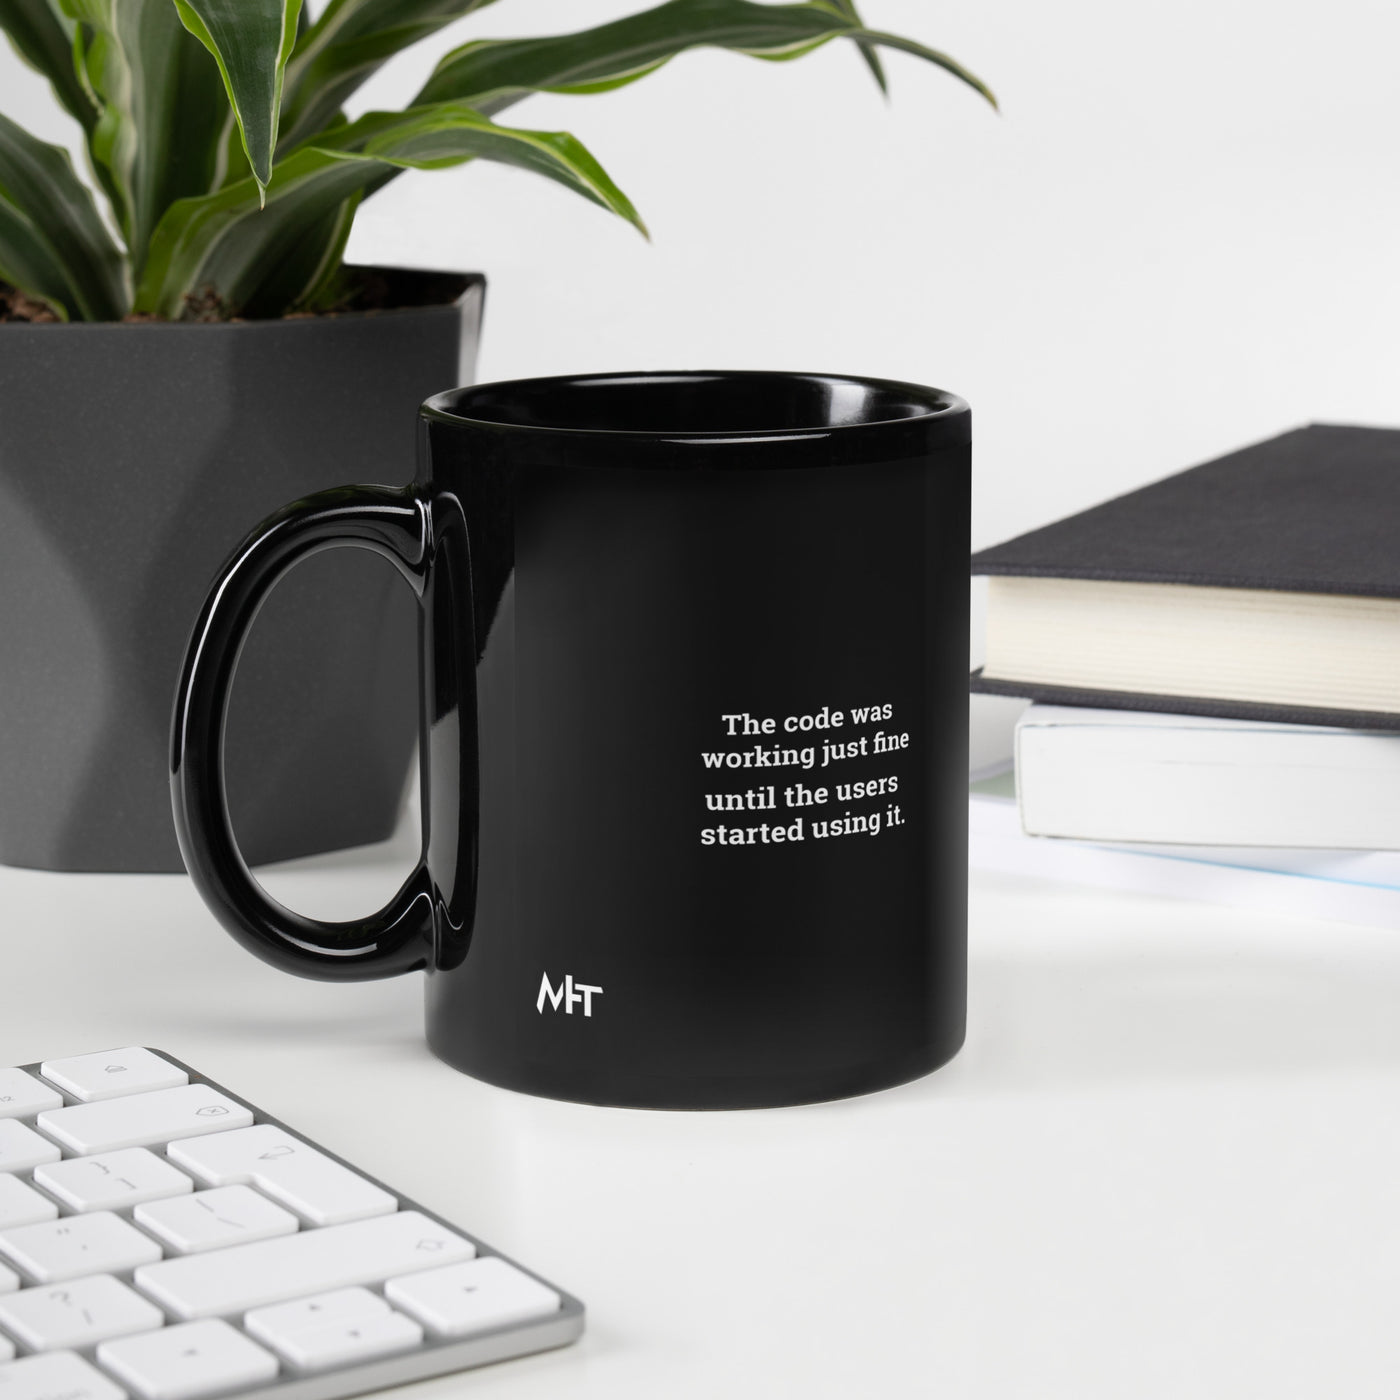 The code was working just fine until the users started using it V1 - Black Glossy Mug